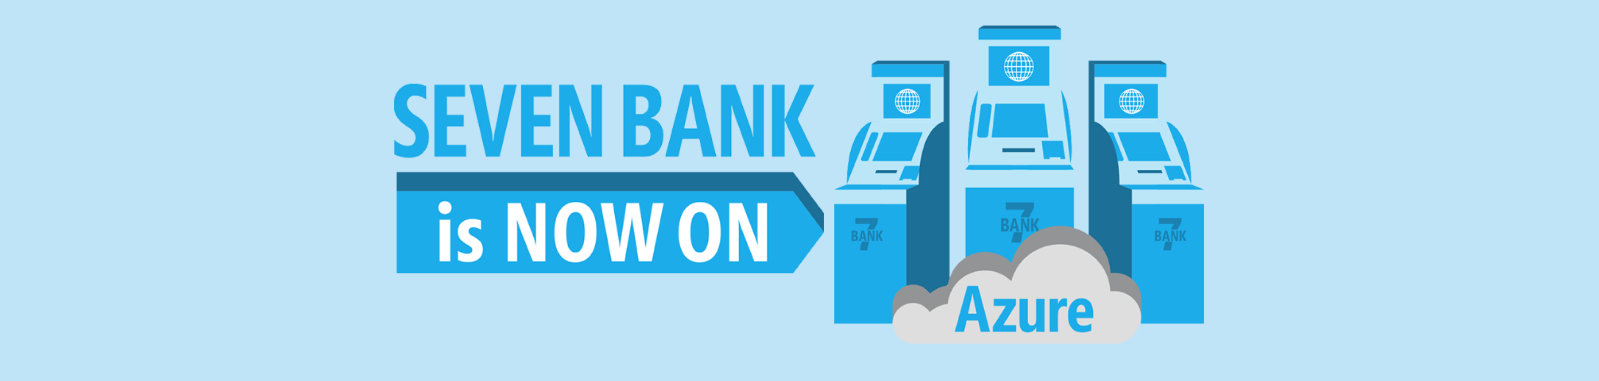 SEVEN BANK is NOW ON Azure